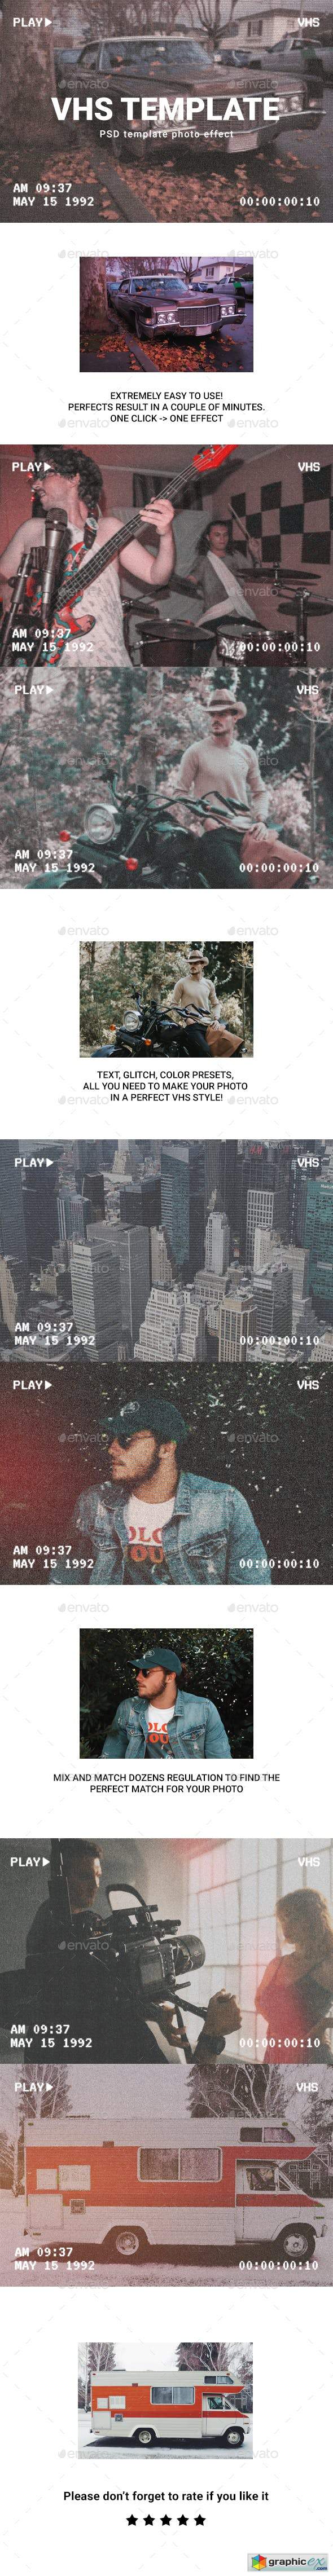 Vhs photo template